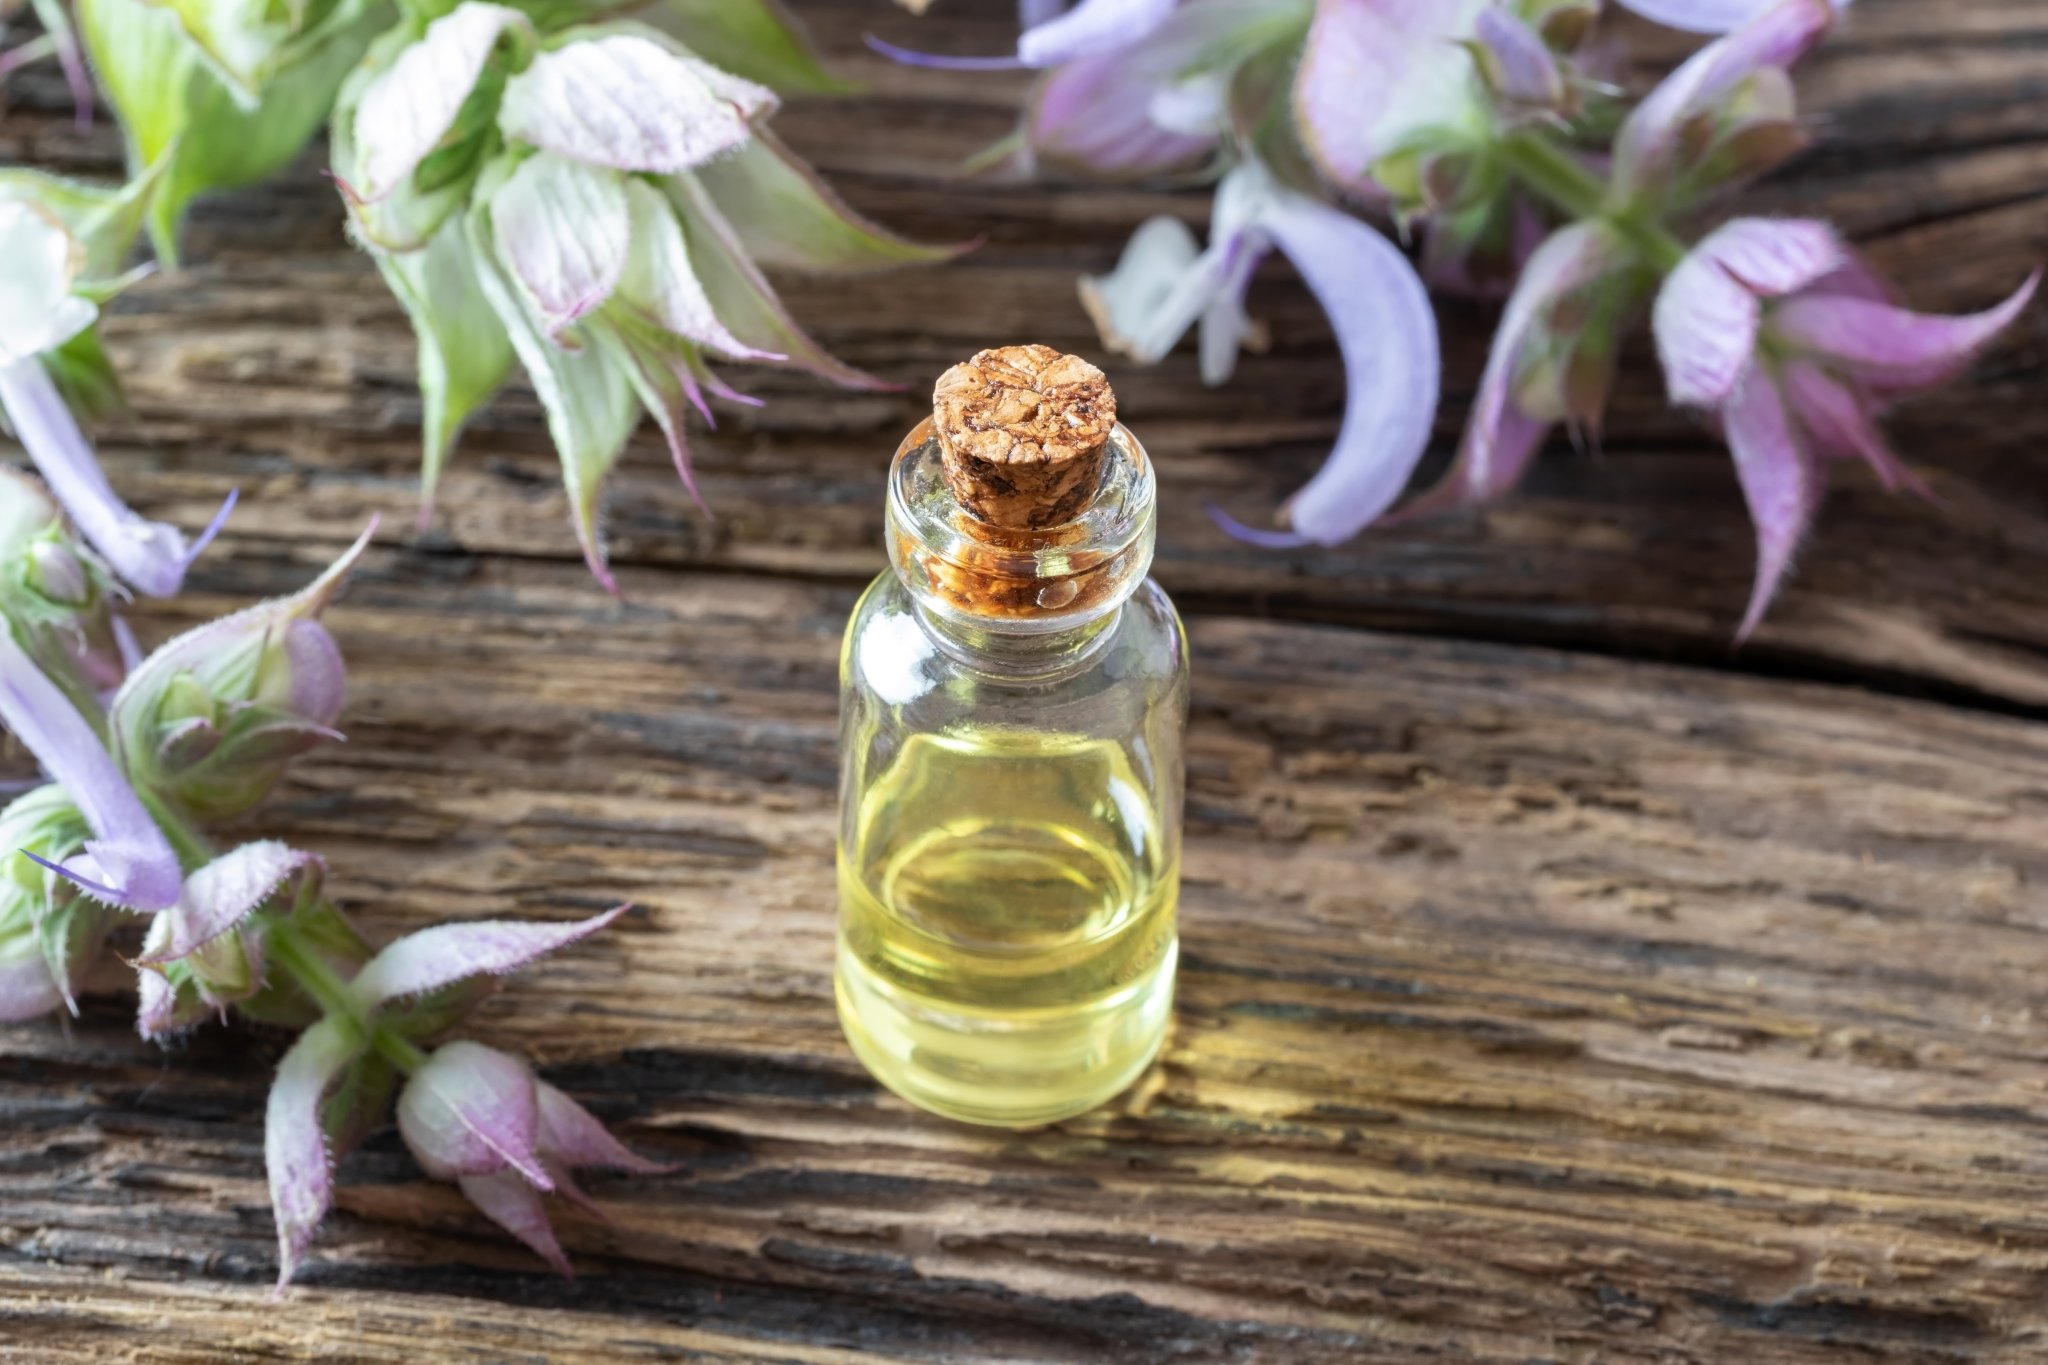 Fight Hair Loss and Menopause Symptoms With This Essential Oil